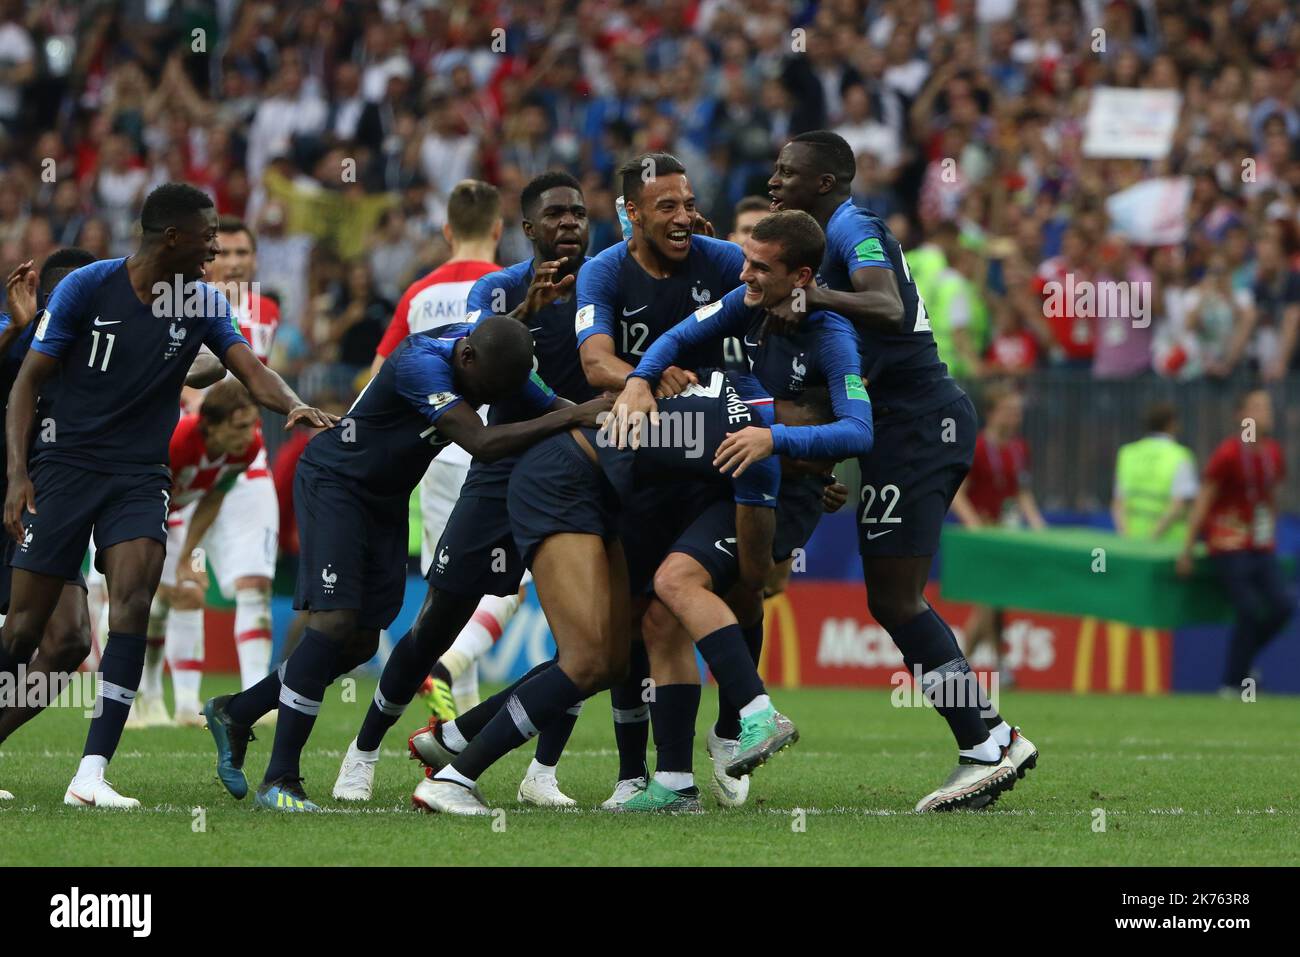 FIFA World Cup Russia 2018, Final Football Match France versus Croatia, France is the new World Champion. France won the World Cup for the second time 4-2 against Croatia. Pictured: Kylian Mbappe, Antoine Griezmann, Olivier Giroud and team mates reacts after a goal © Pierre Teyssot / Maxppp Stock Photo